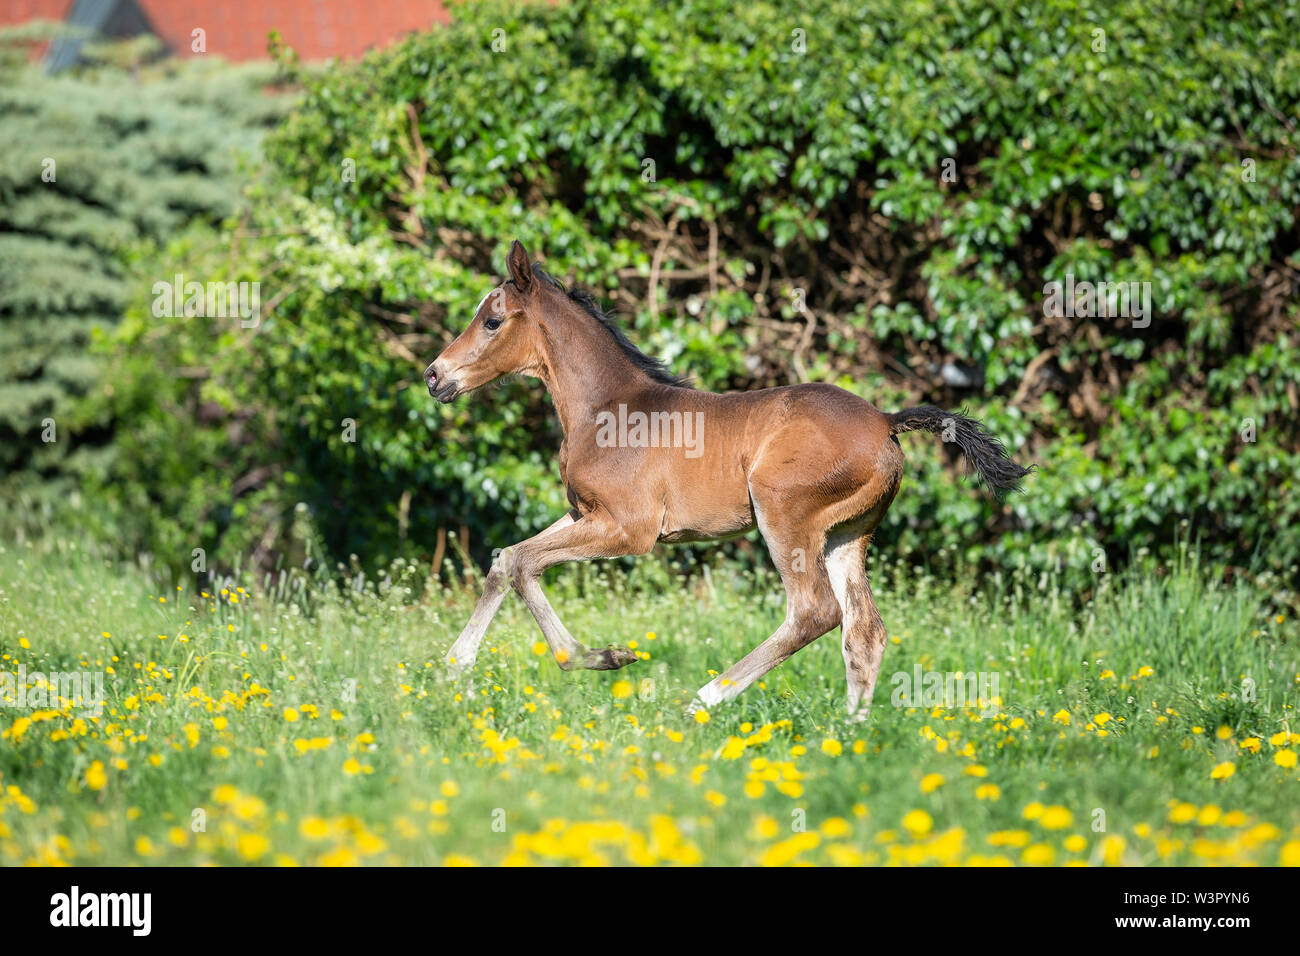 Trakehner. Bay foal galloping on a pasture. Germany Stock Photo